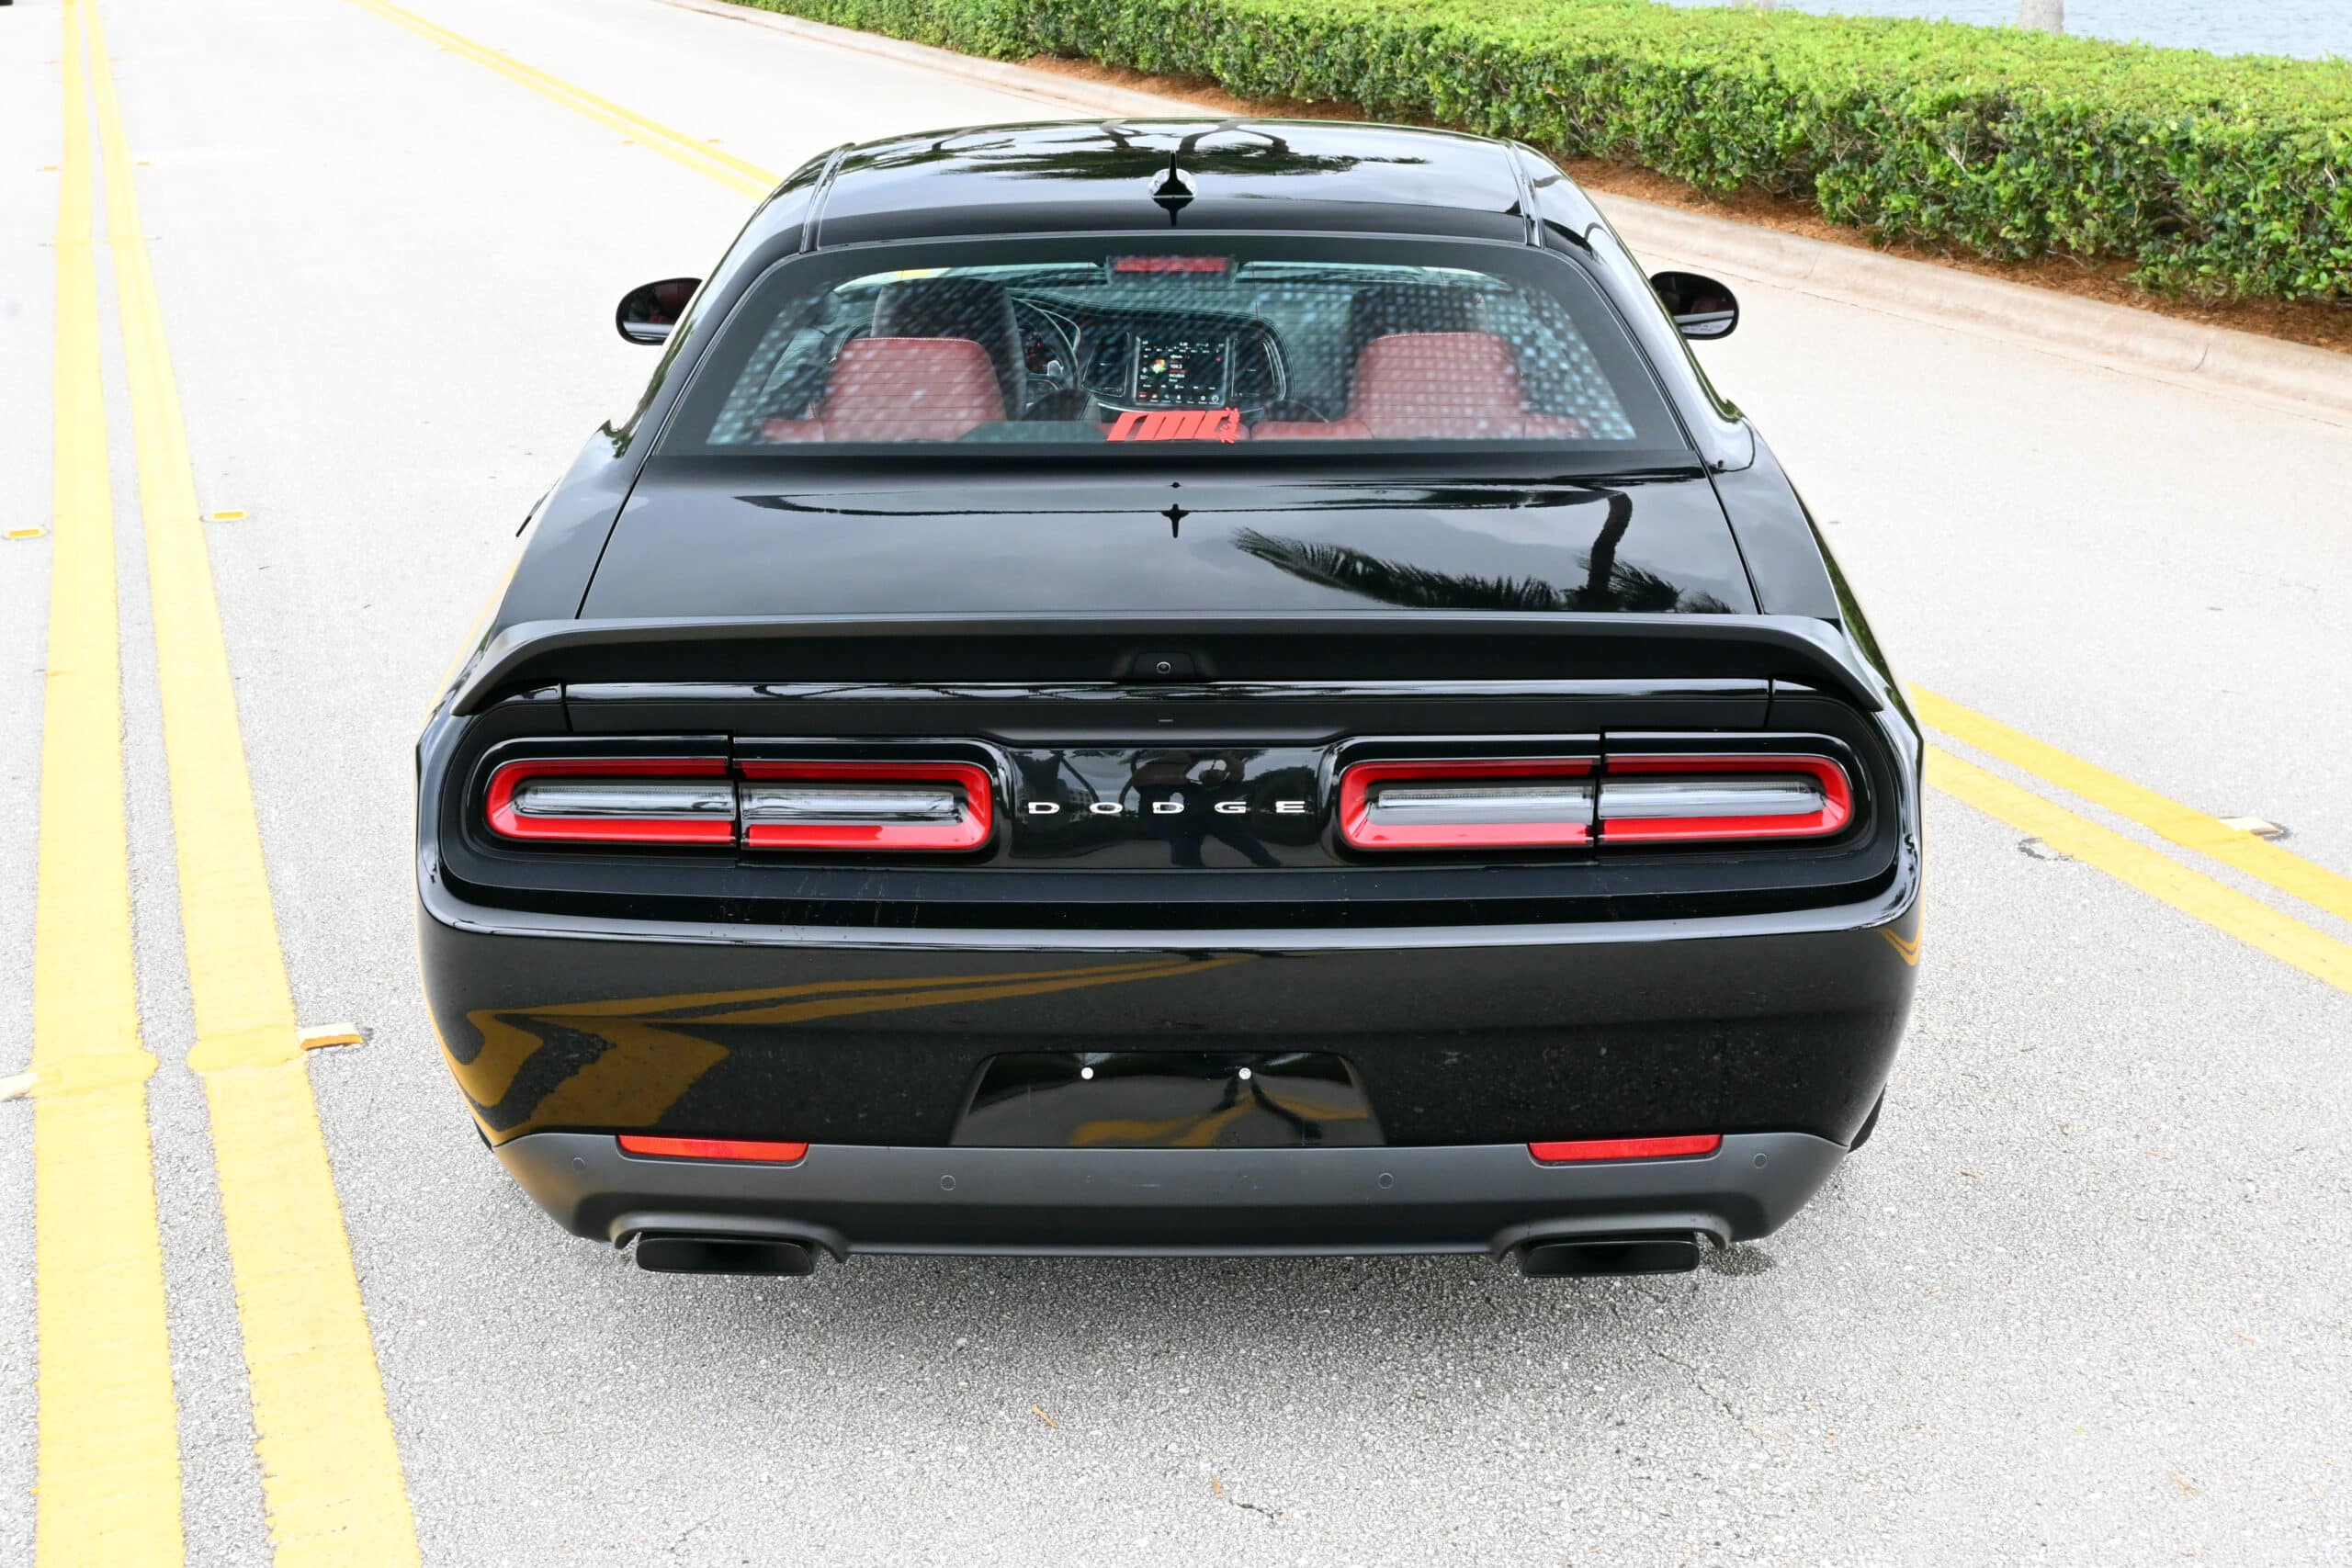 2020 Dodge Challenger SRT Superstock – One owner, 2500 miles, one of less than 200 Superstocks made in 2020, Loaded with options, Dealer serviced, Original Window Sticker